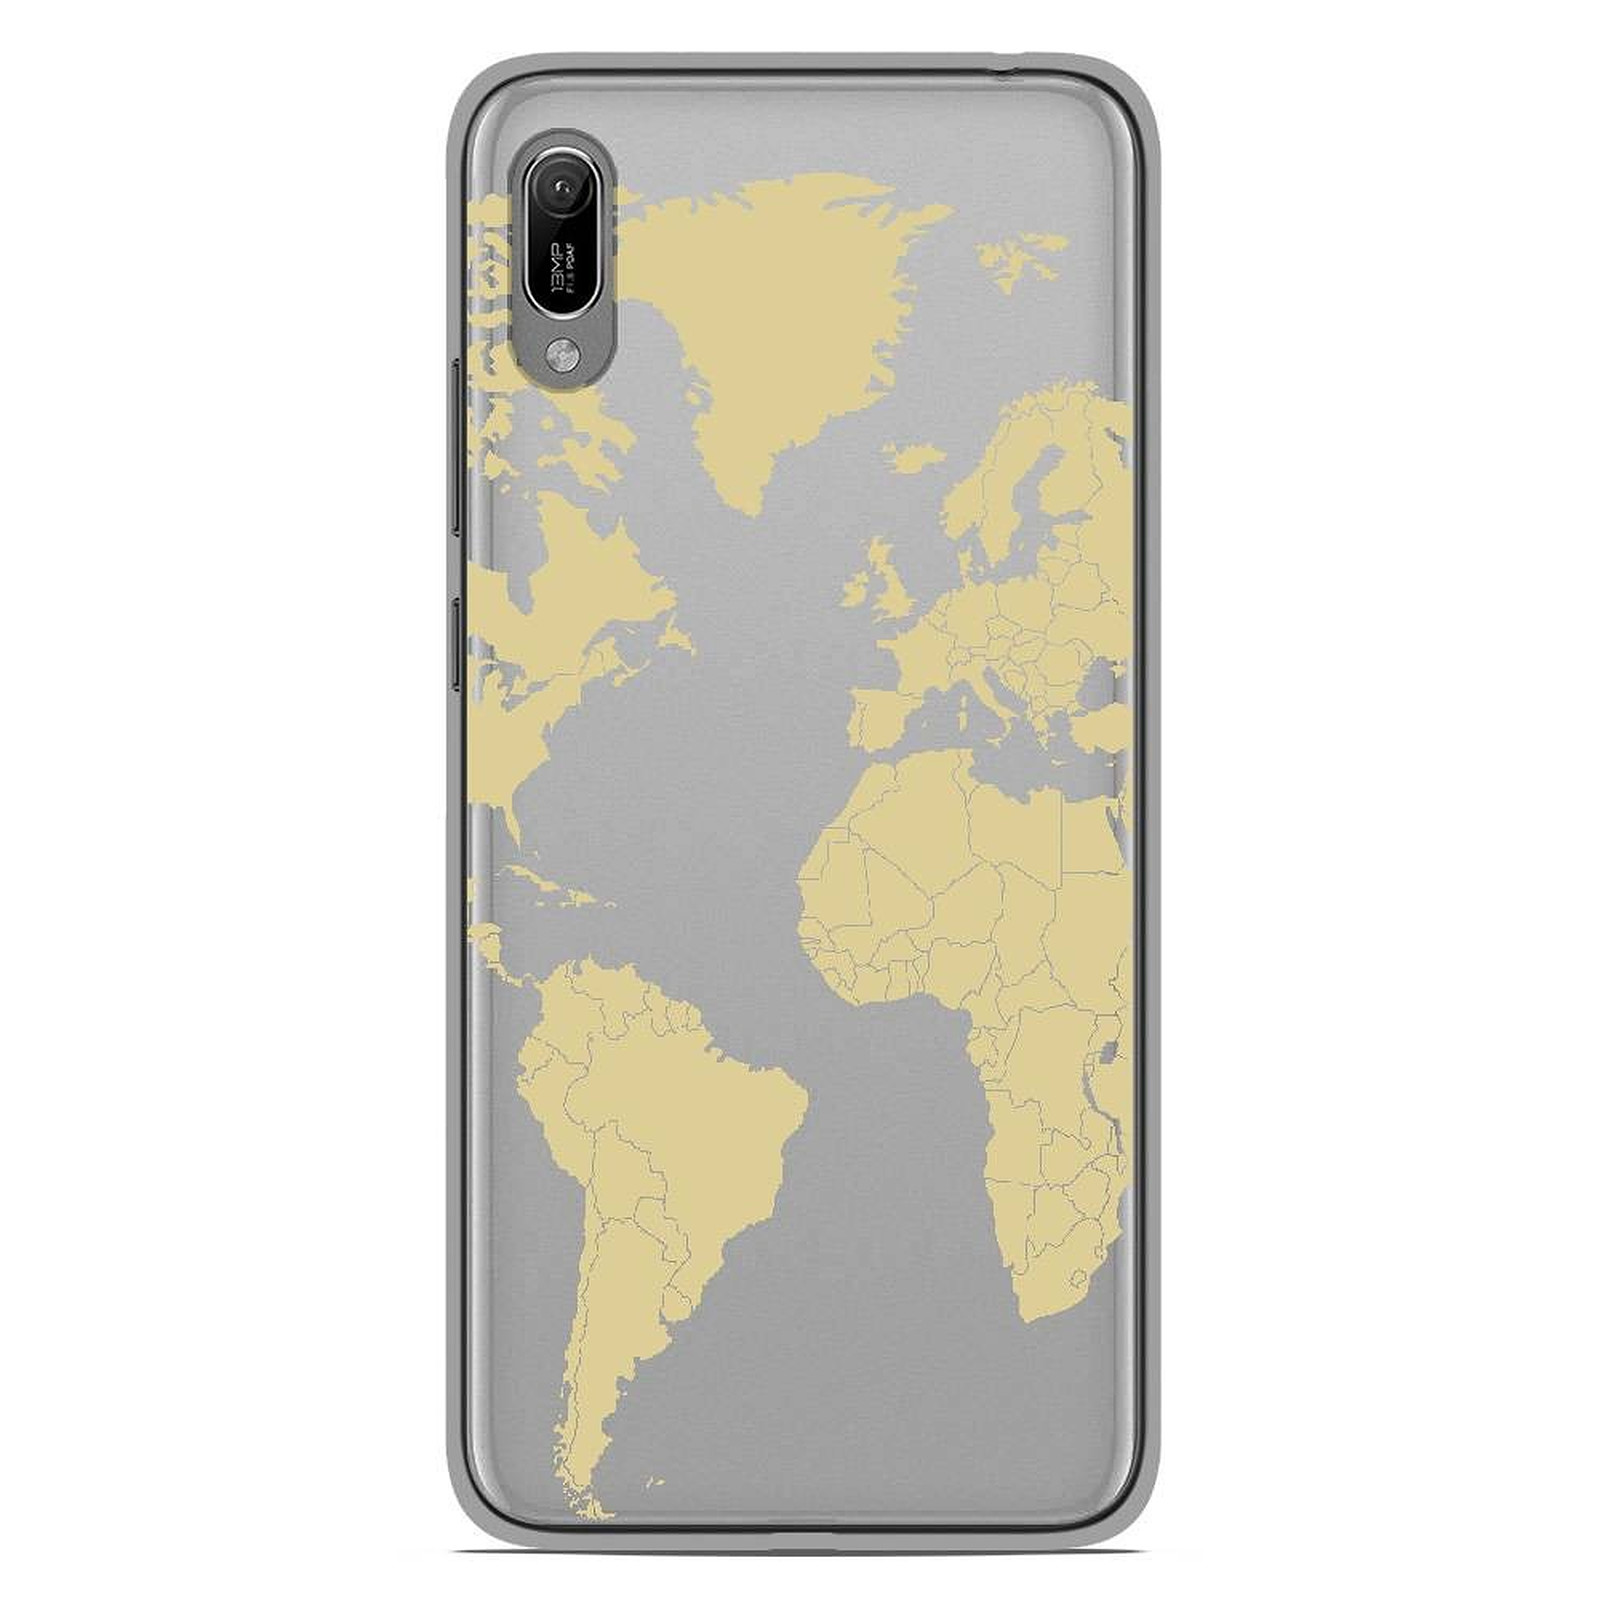 1001 Coques Coque silicone gel Huawei Y6 2019 motif Map beige - Coque telephone 1001Coques